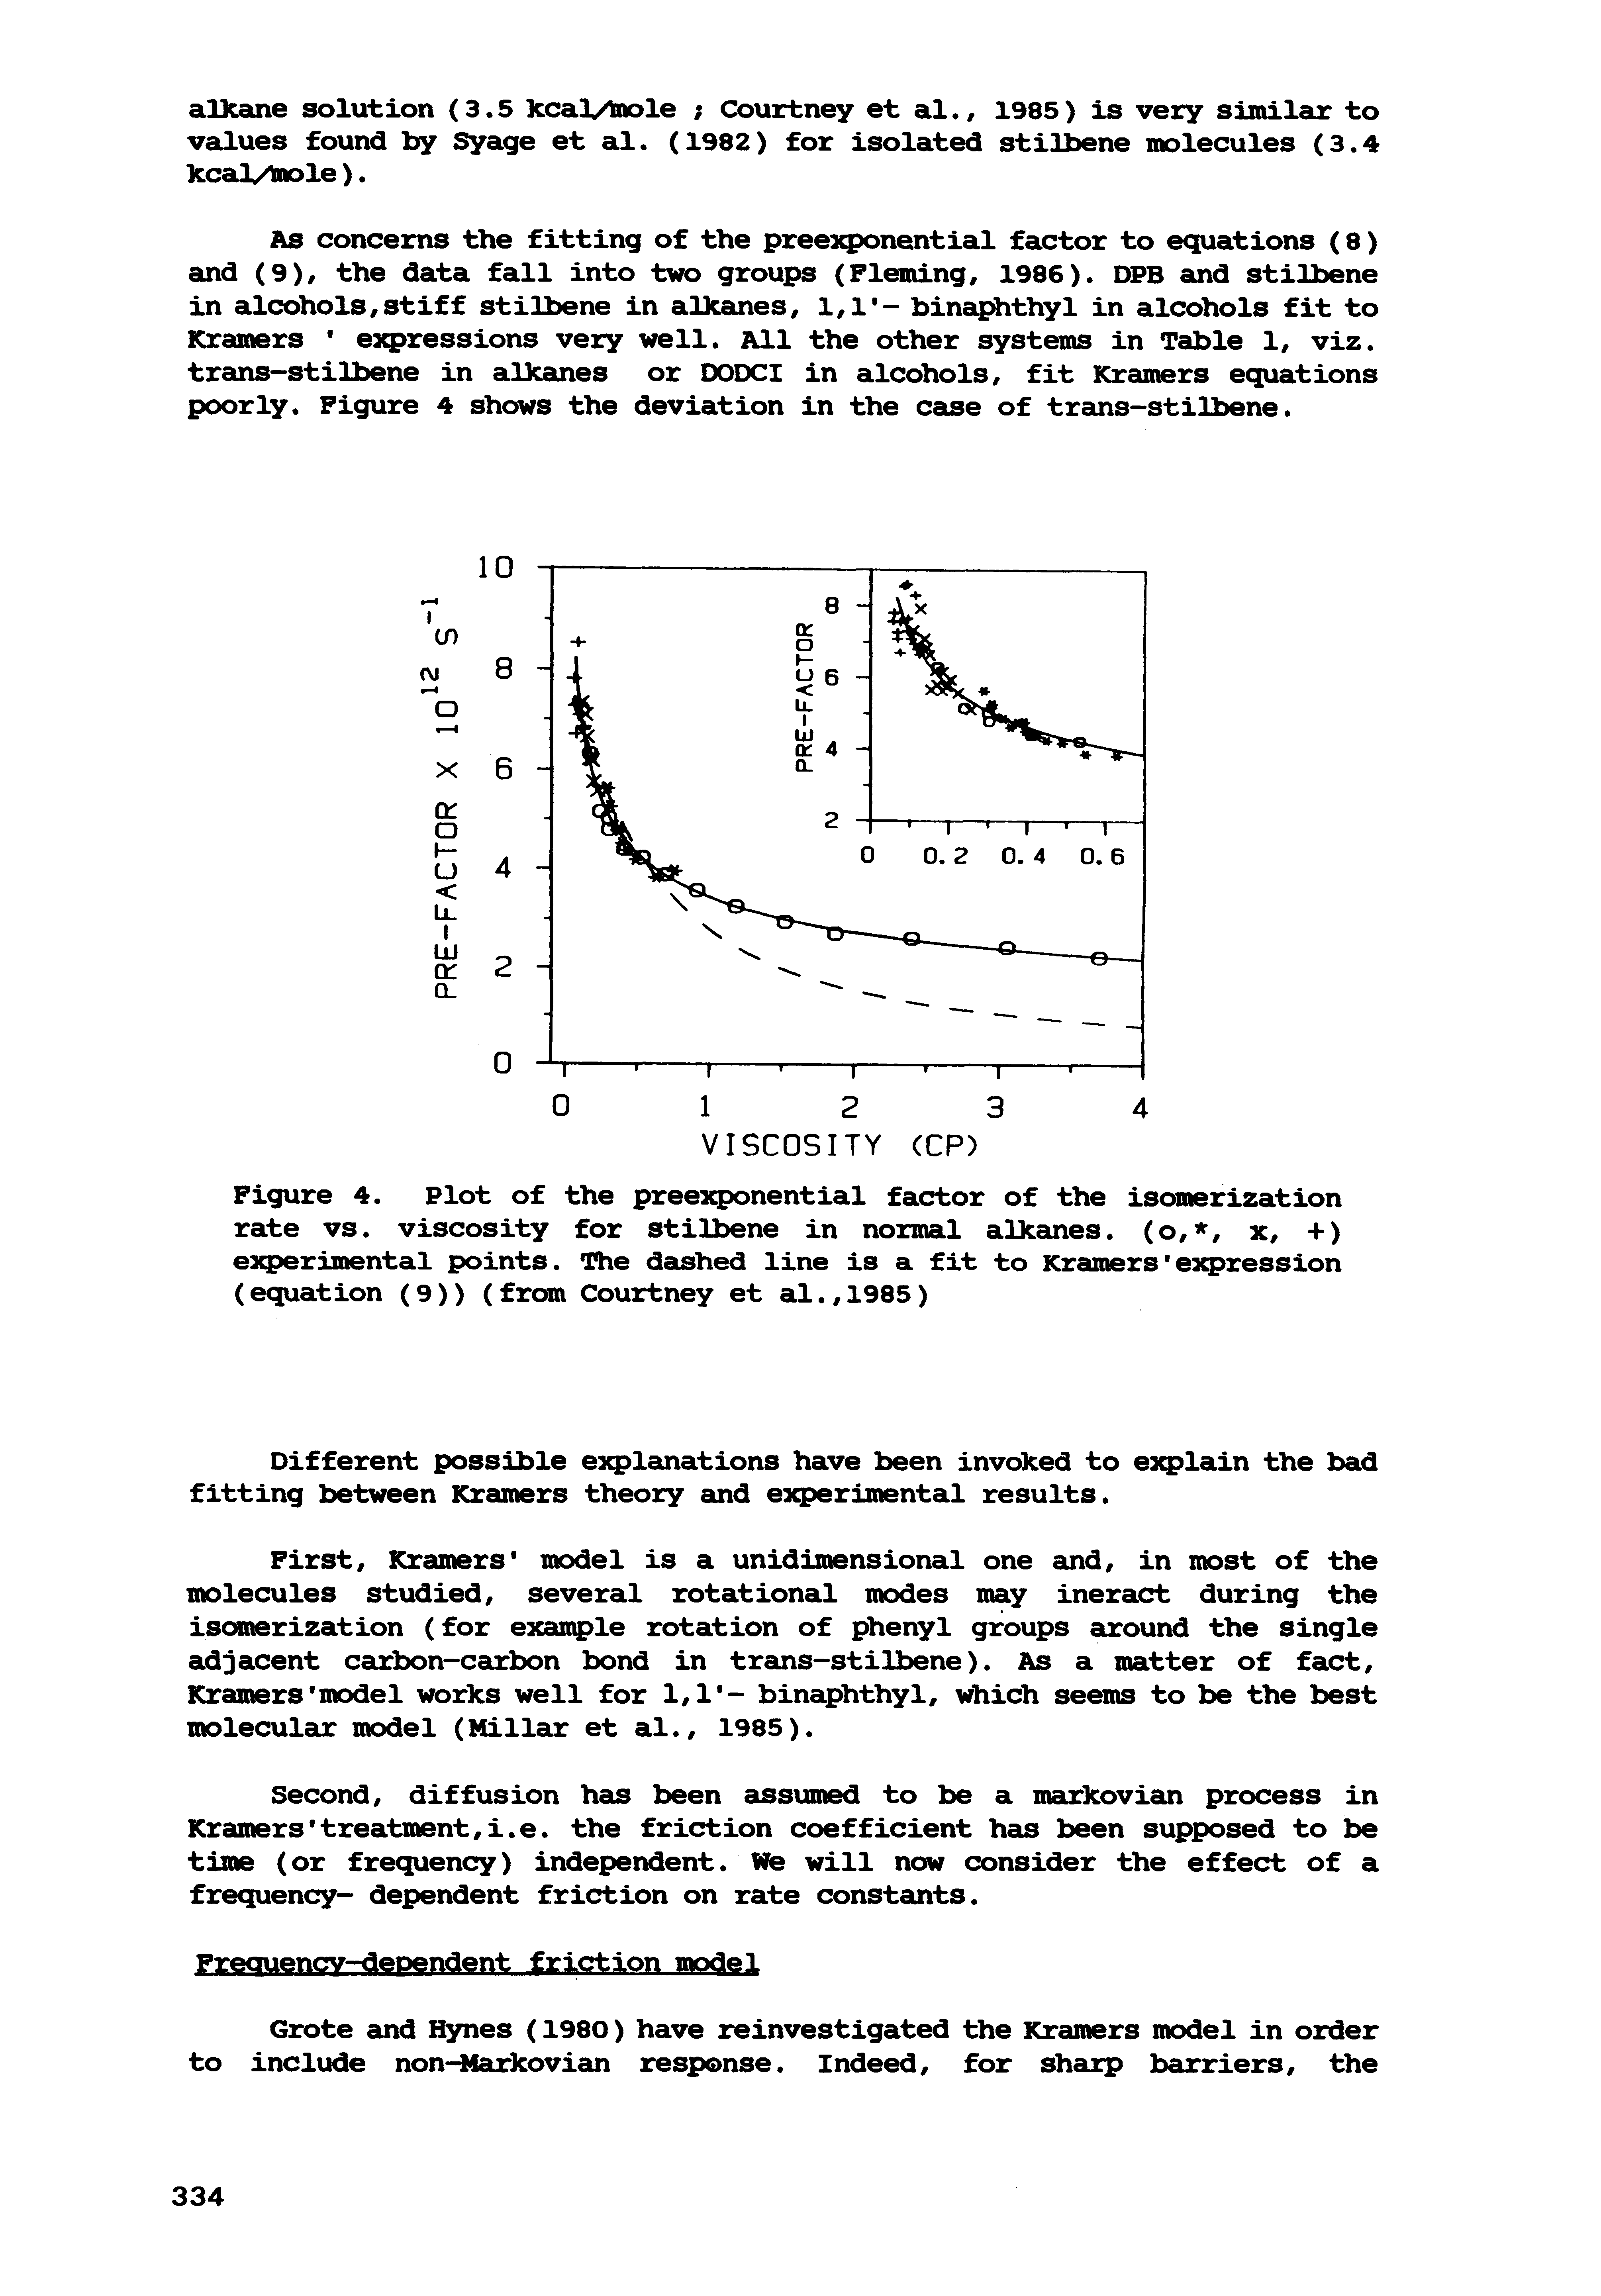 Figure 4. Plot of the pree3qx>nential factor of the isomerization rate vs. viscosity for stilbene in normal alkanes, (o,, x, +) experimental points. The dashed line is a fit to Kramers expression (equation (9)) (from Courtney et al.,1985)...